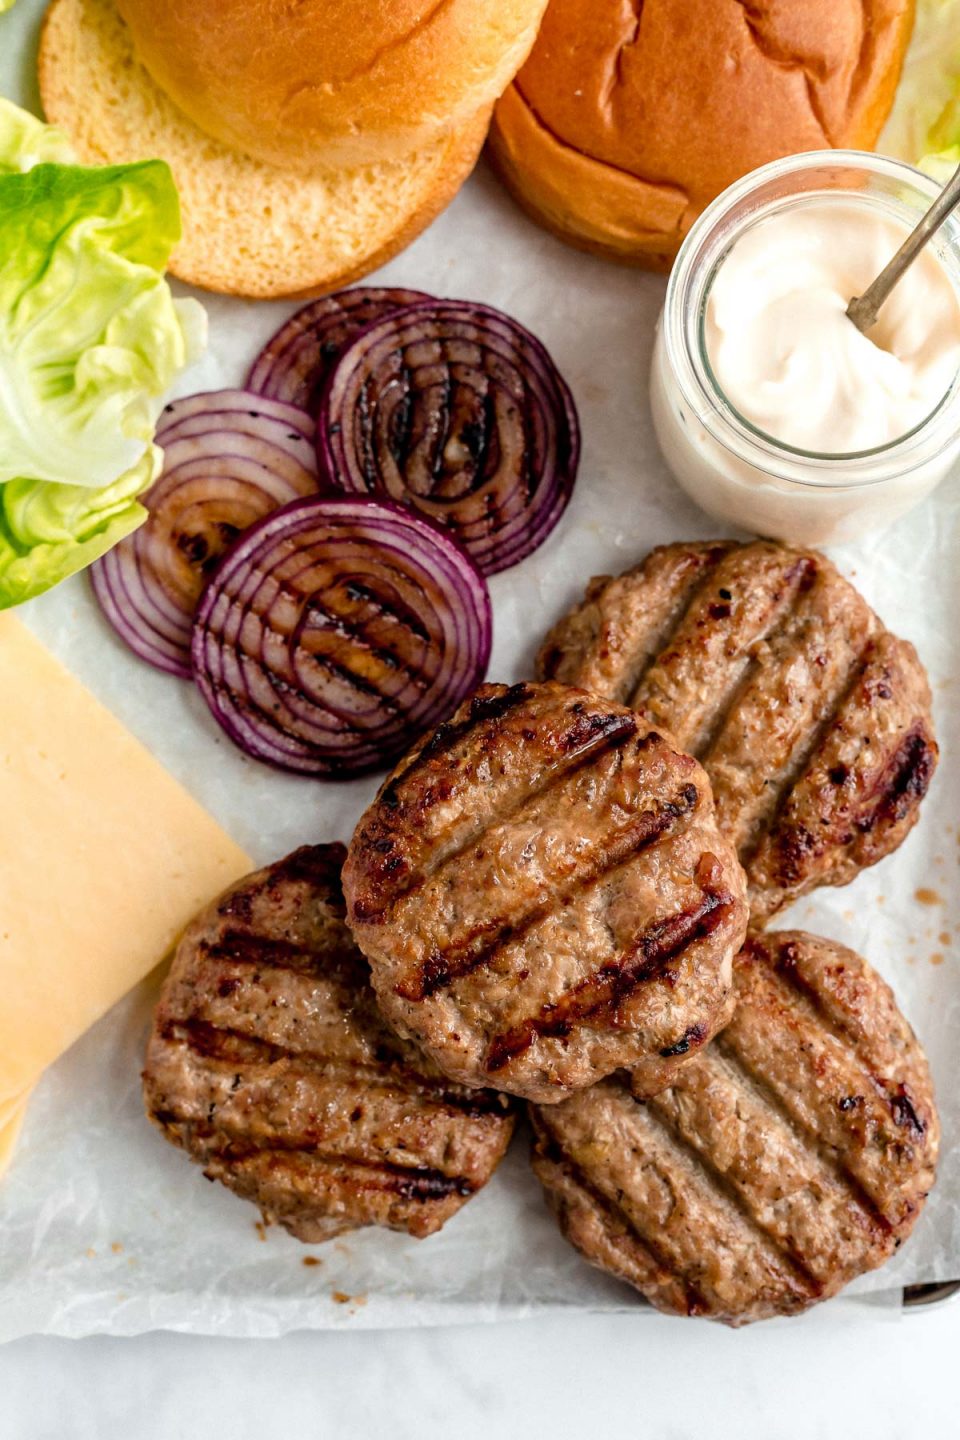 Grilled turkey burgers arranged on a platter with toppings - sliced cheese, leaf lettuce, grilled red onions & a jar of burger sauce.